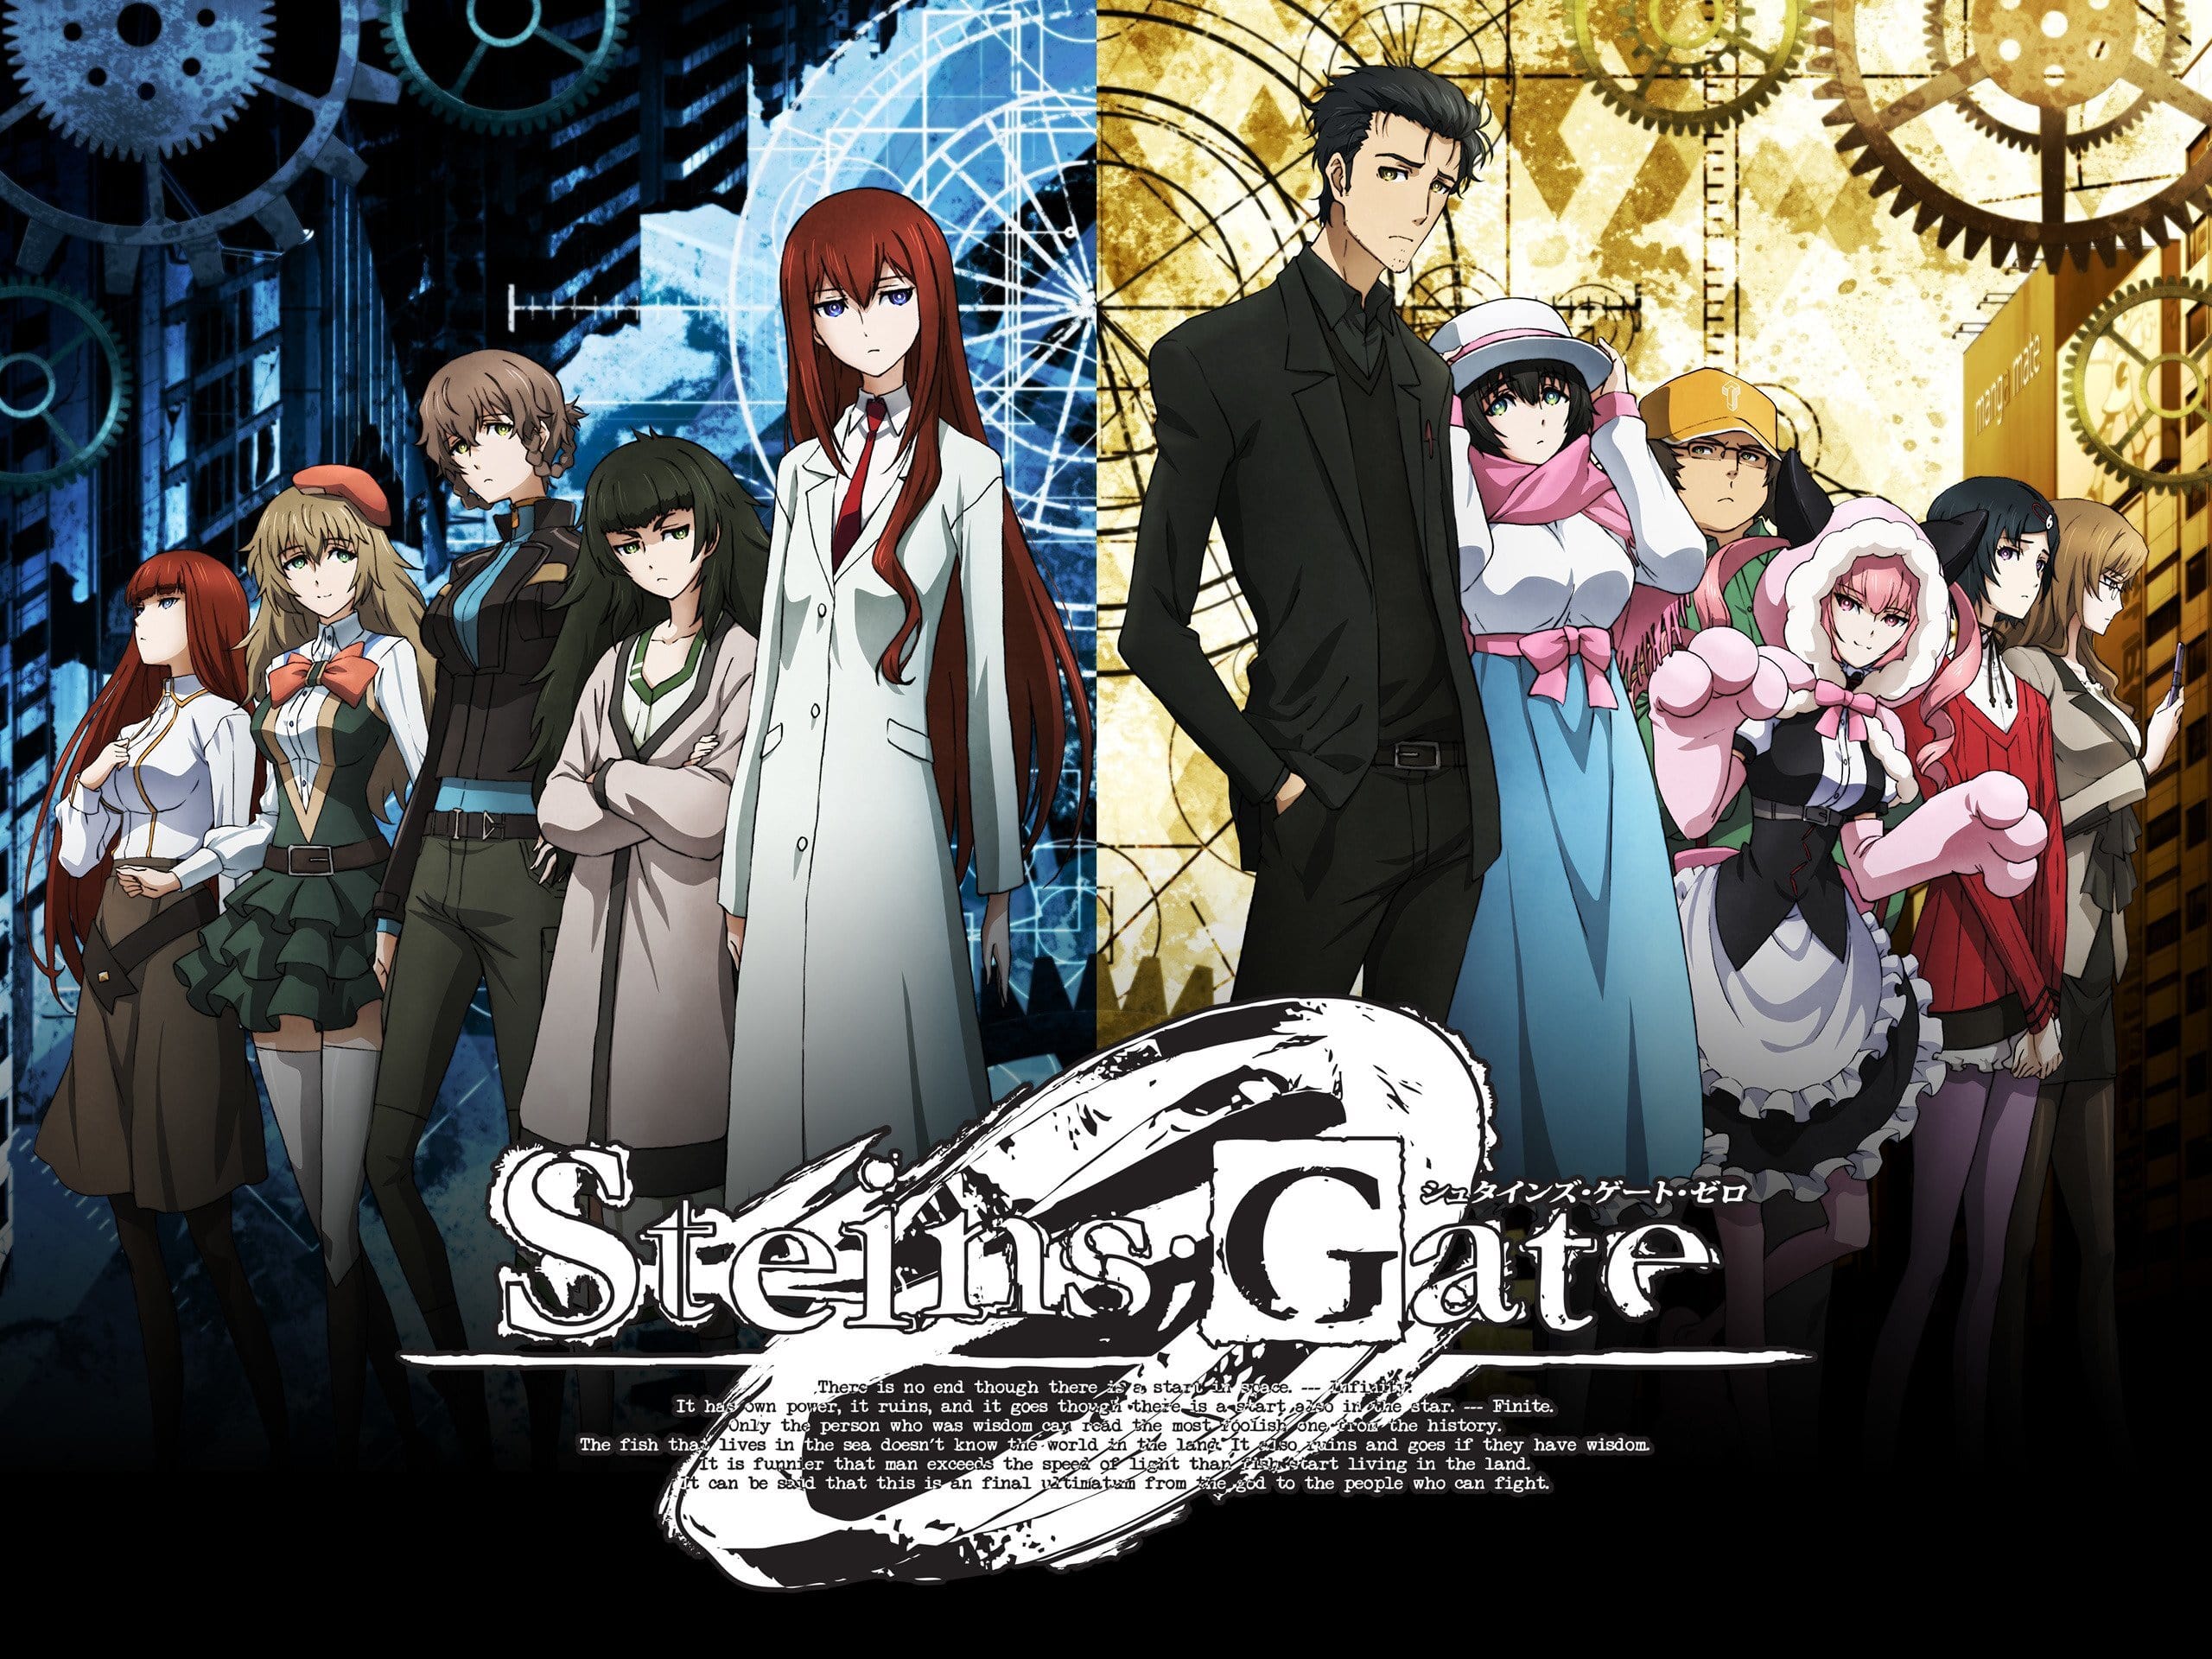 Watch Gate Keepers (Dub) English Subbed in HD on 9anime